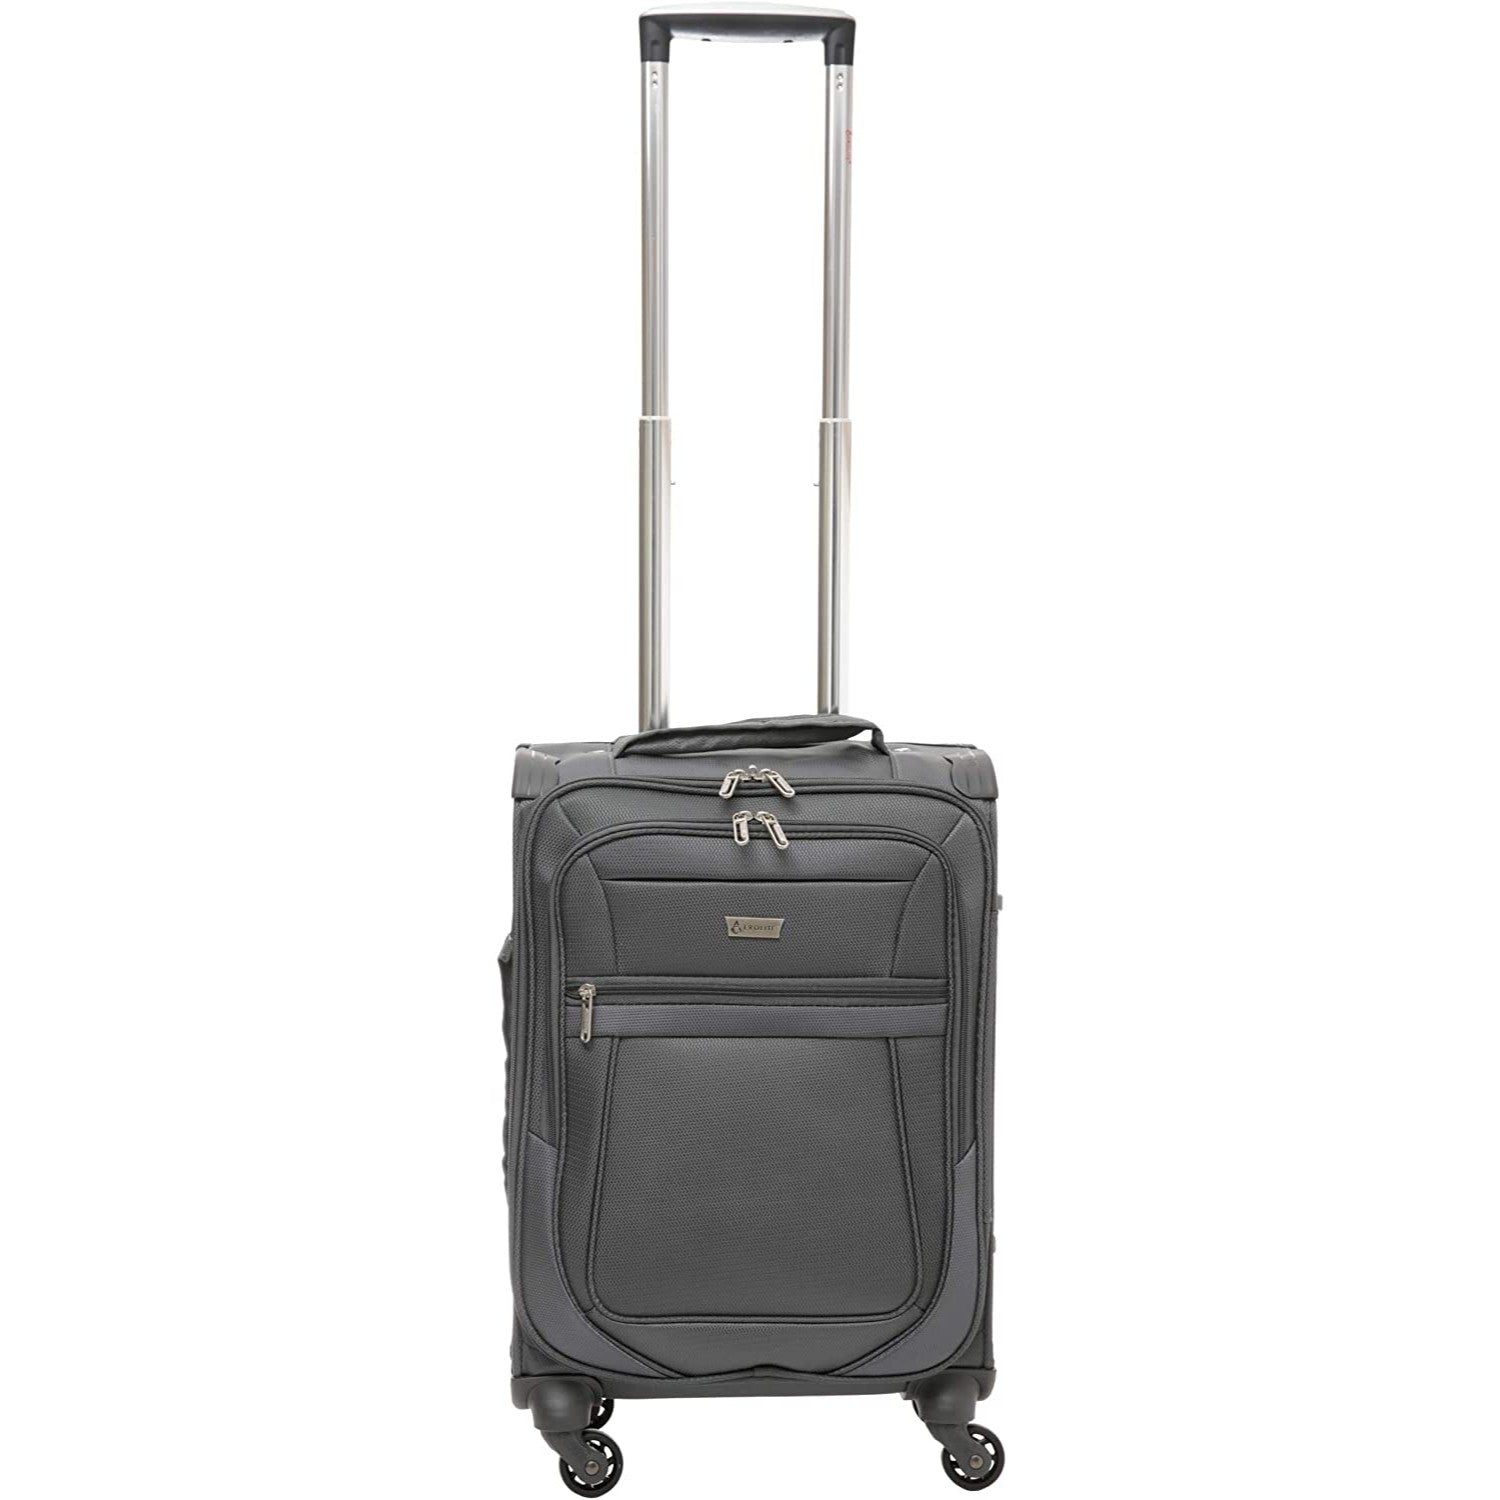 Aerolite Reinforced Super Strong and Light 4 Wheel Lightweight Hold Check in Luggage Suitcase With  3-Digit Combination Barrel Padlock, Double-Tube Retractable Trolley Handle, 10 Year Guarantee